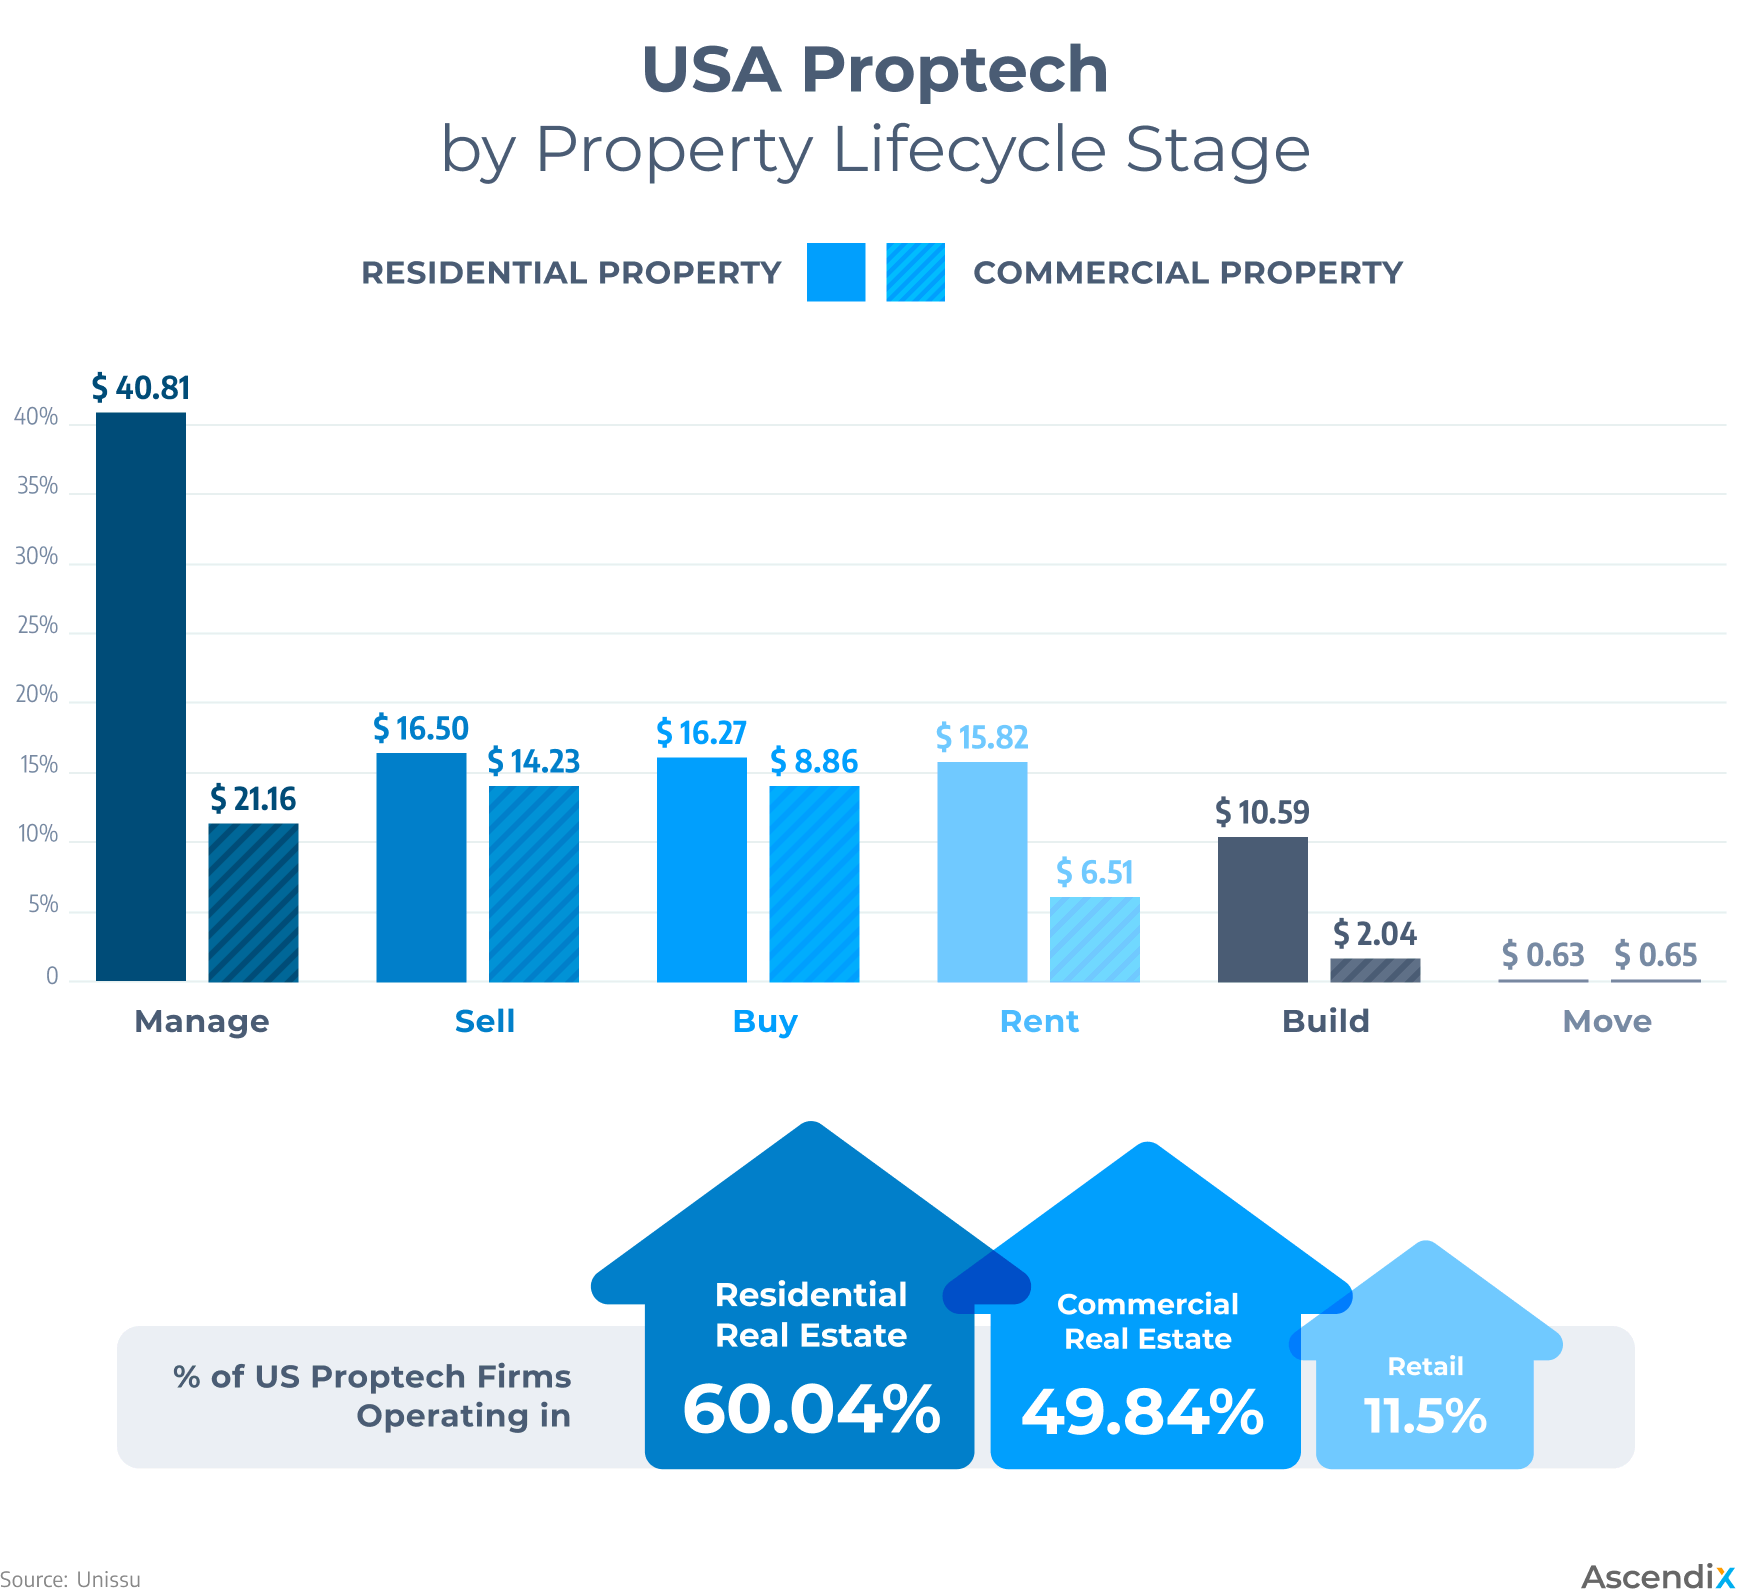 USA Residential Proptech by Property Lifecycle Stage